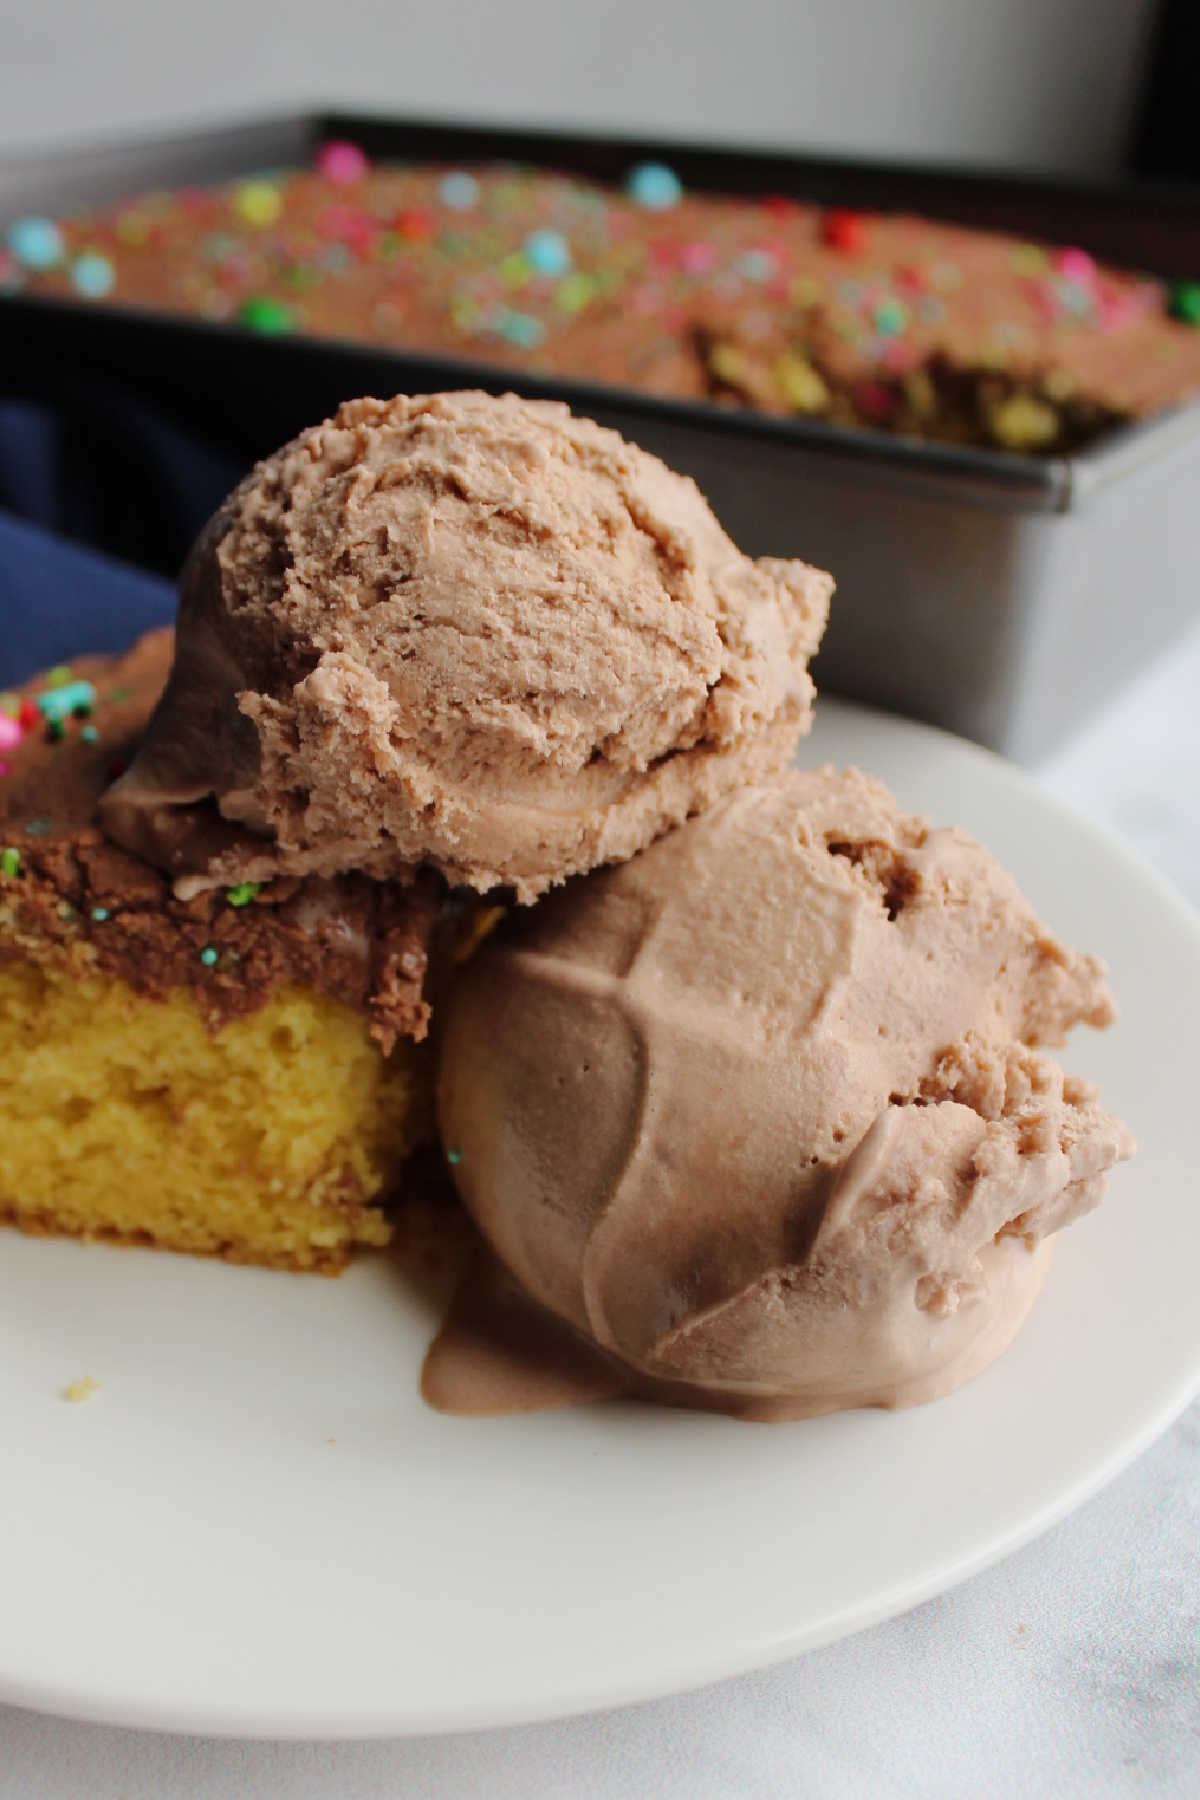 Two scoops of brownie batter ice cream on plate with cake with more cake in background.